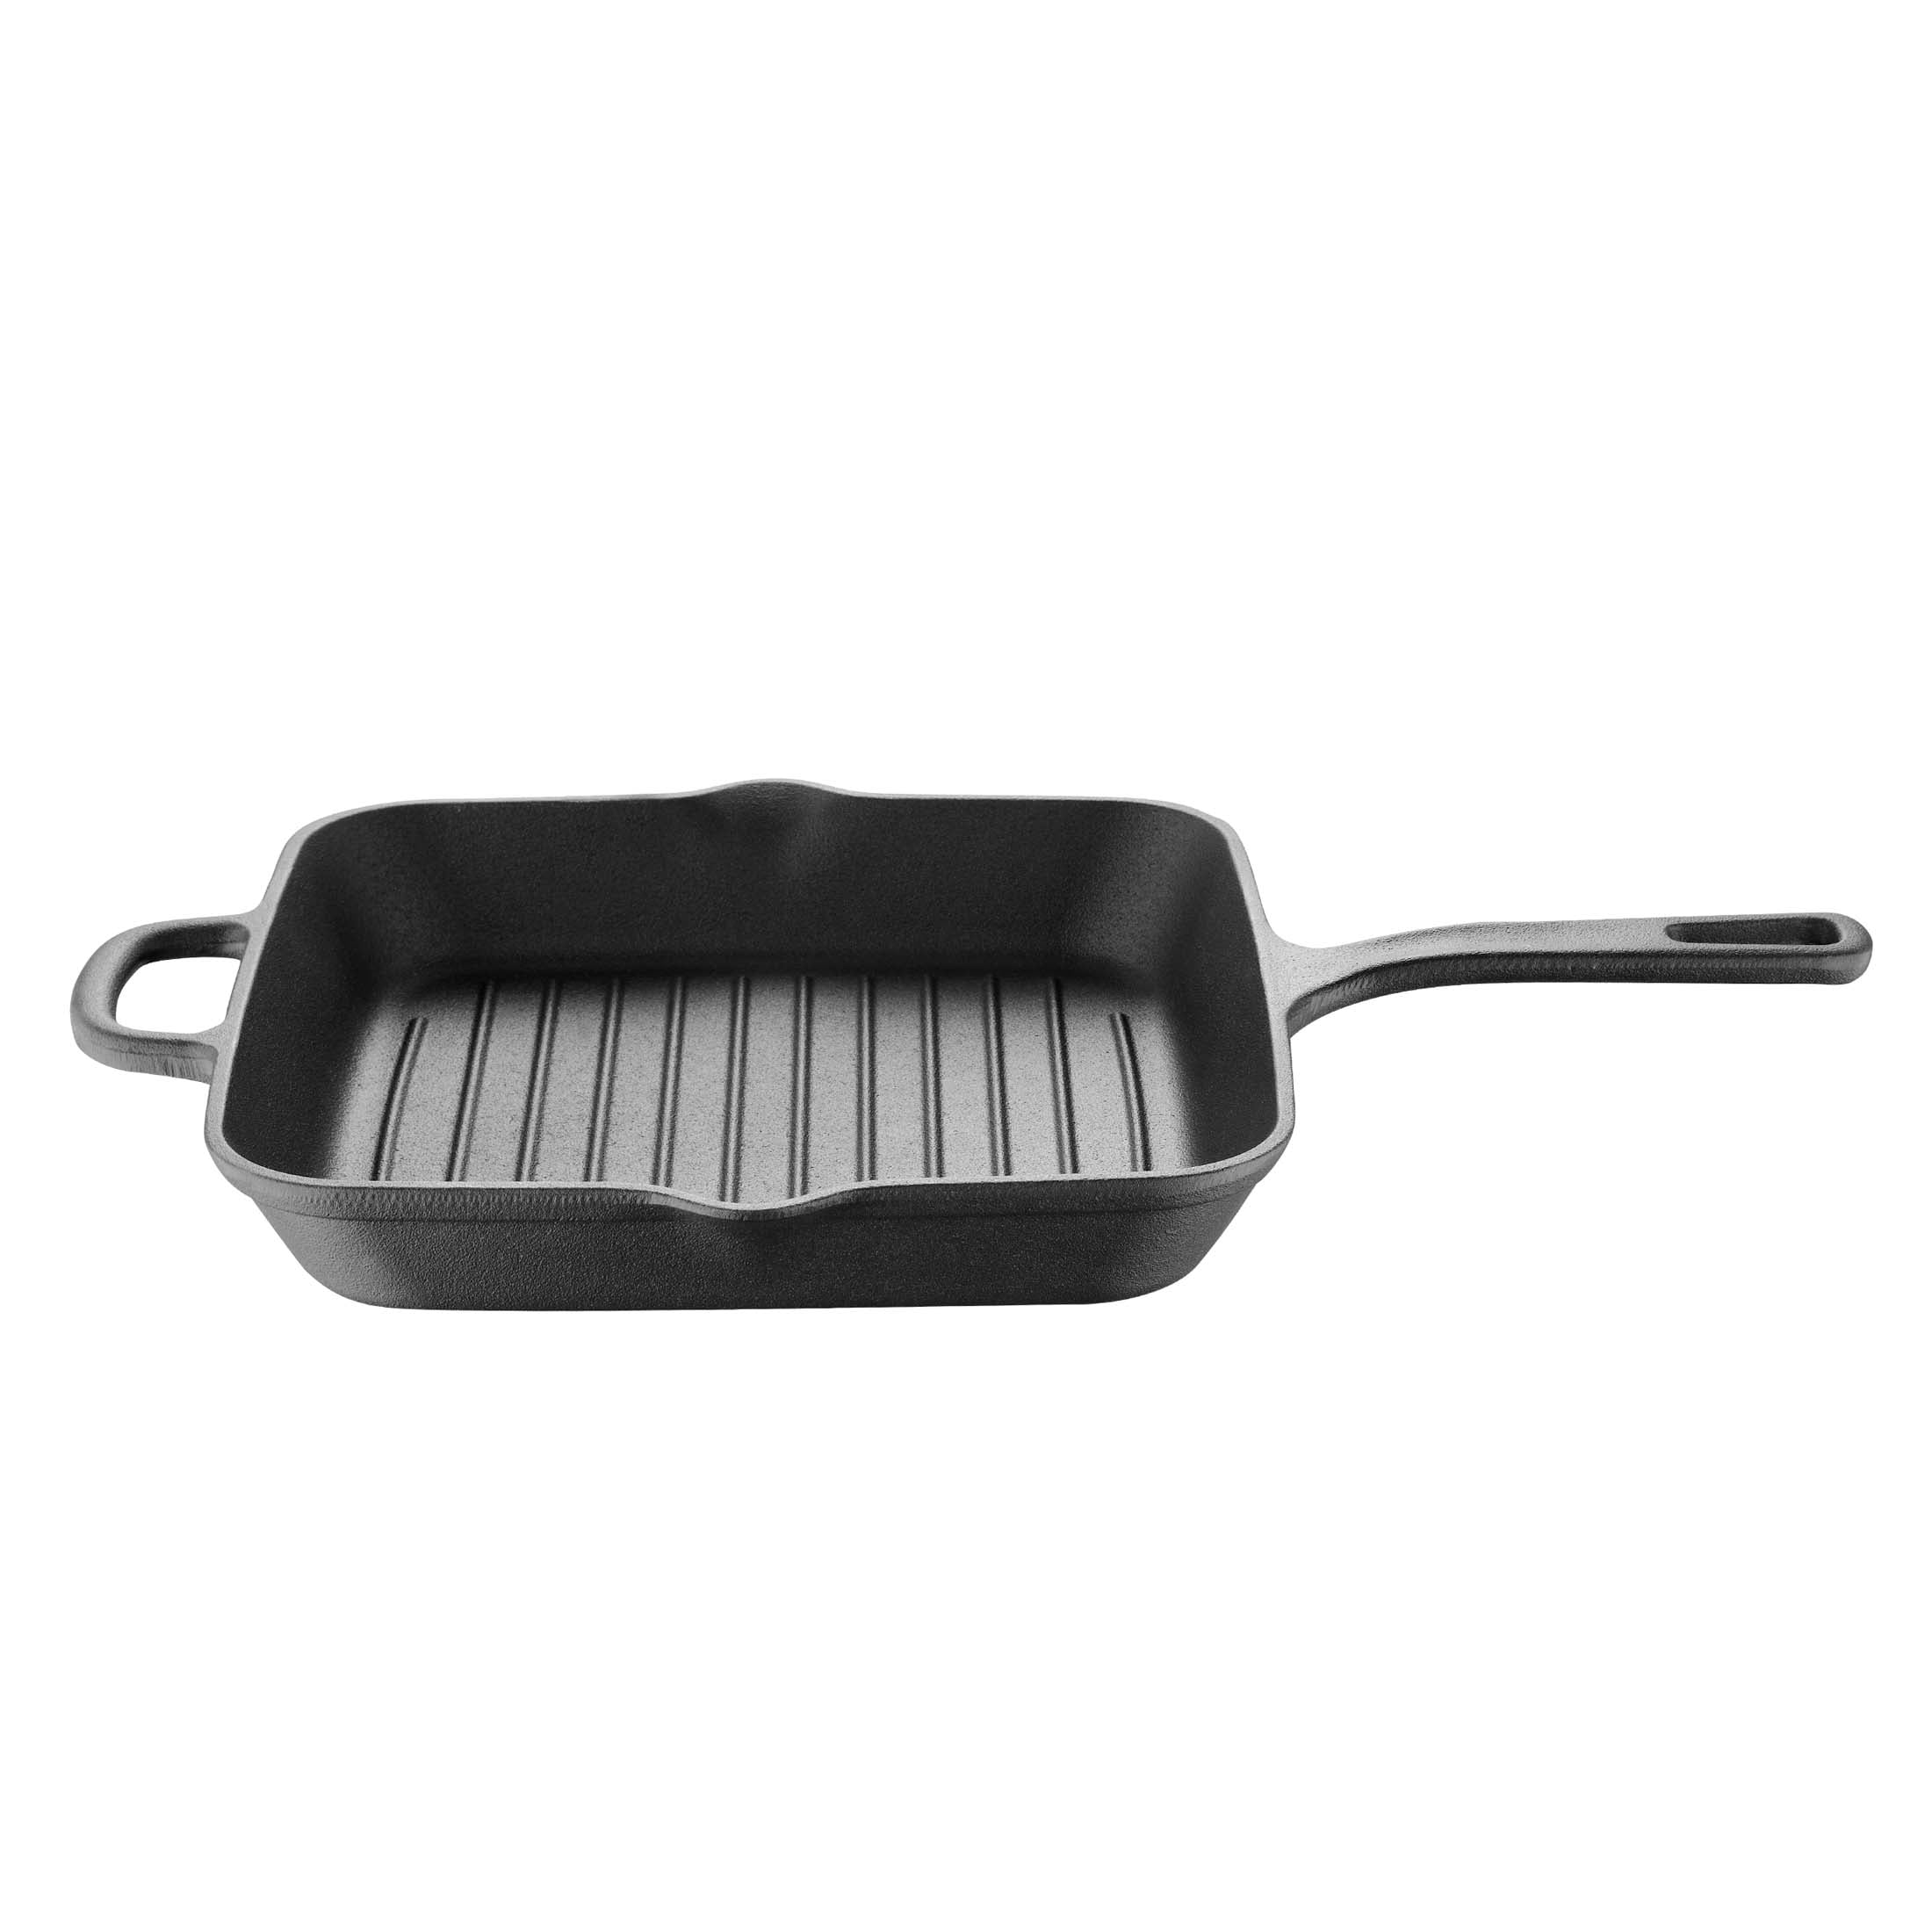 Bobikuke Square Grill Pan, Nonstick Grill Pan for Stove Tops Steak Pan  Skillet with Removeable Handle, Oven& Dishwasher Safe, Double Pour Spouts,  8